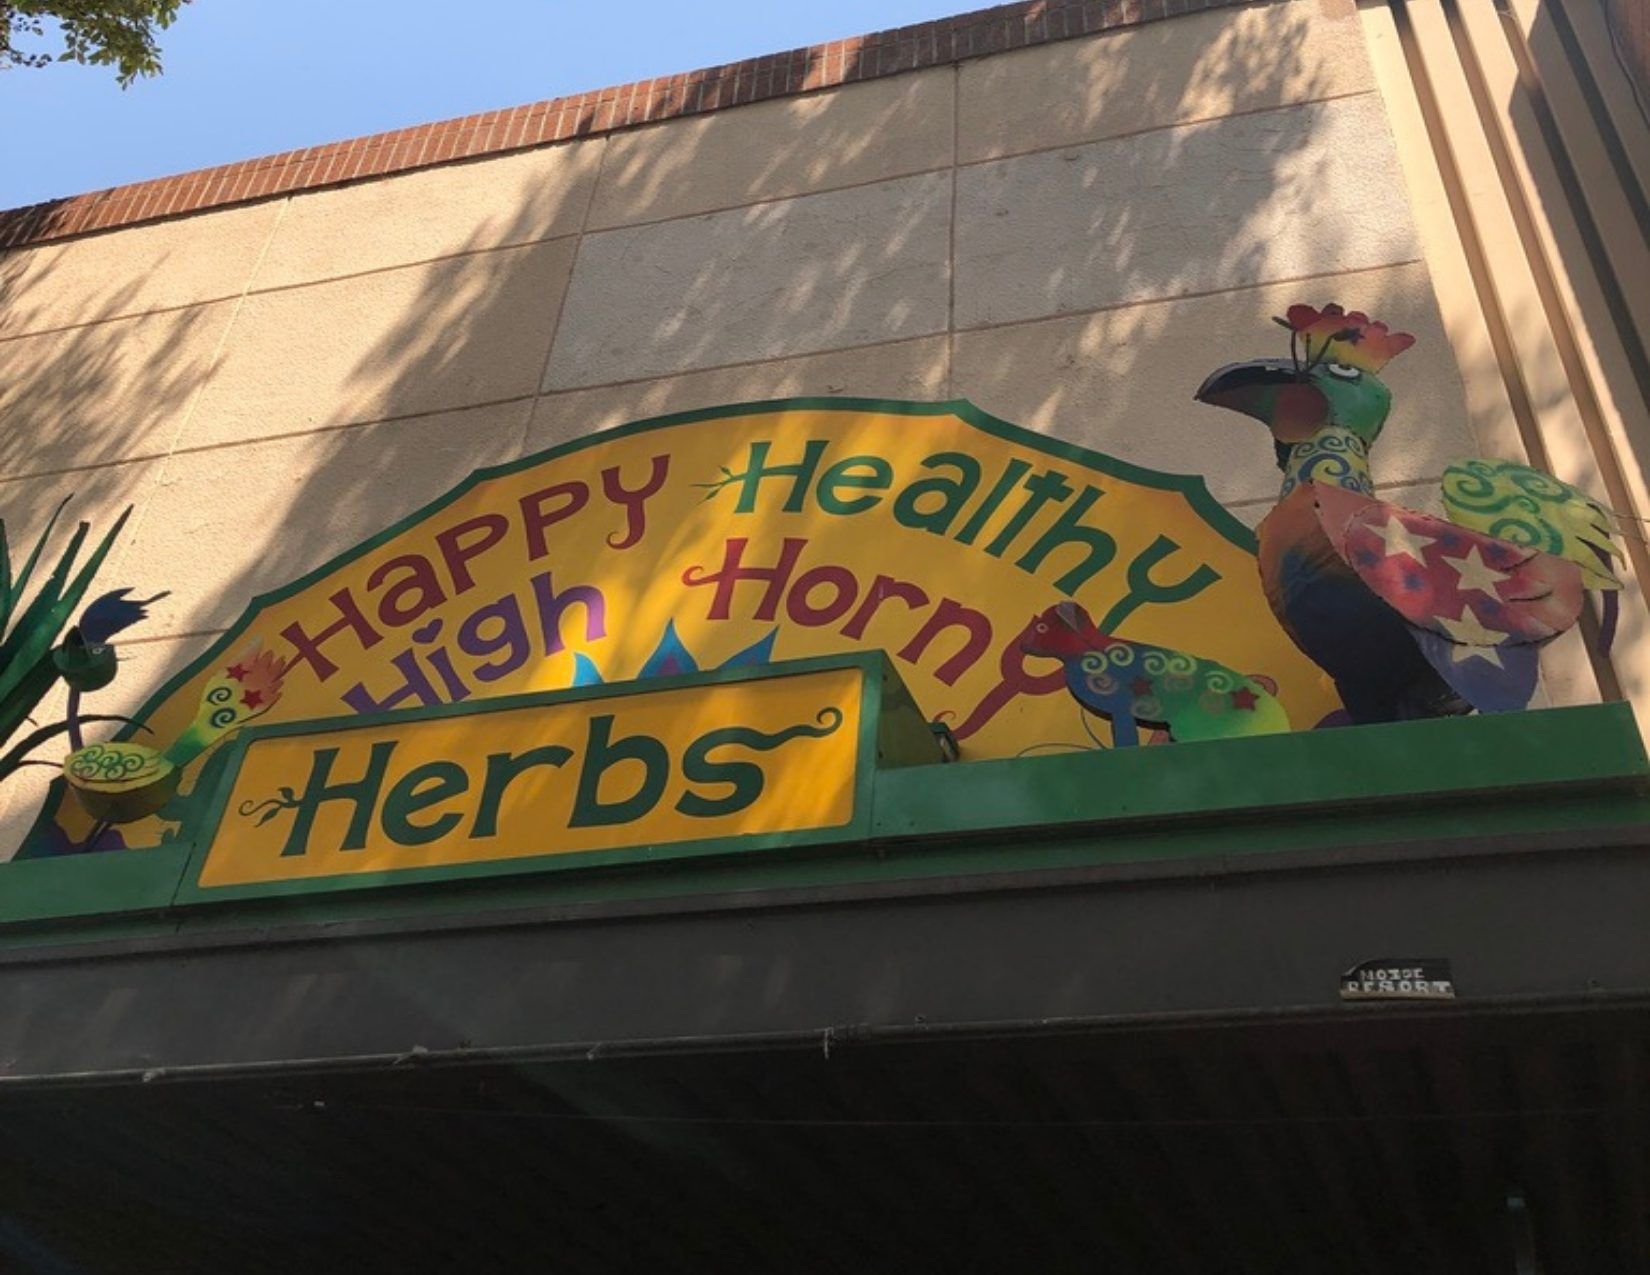 Sign for Happy Healthy High Horny Herbs in Tempe Arizona